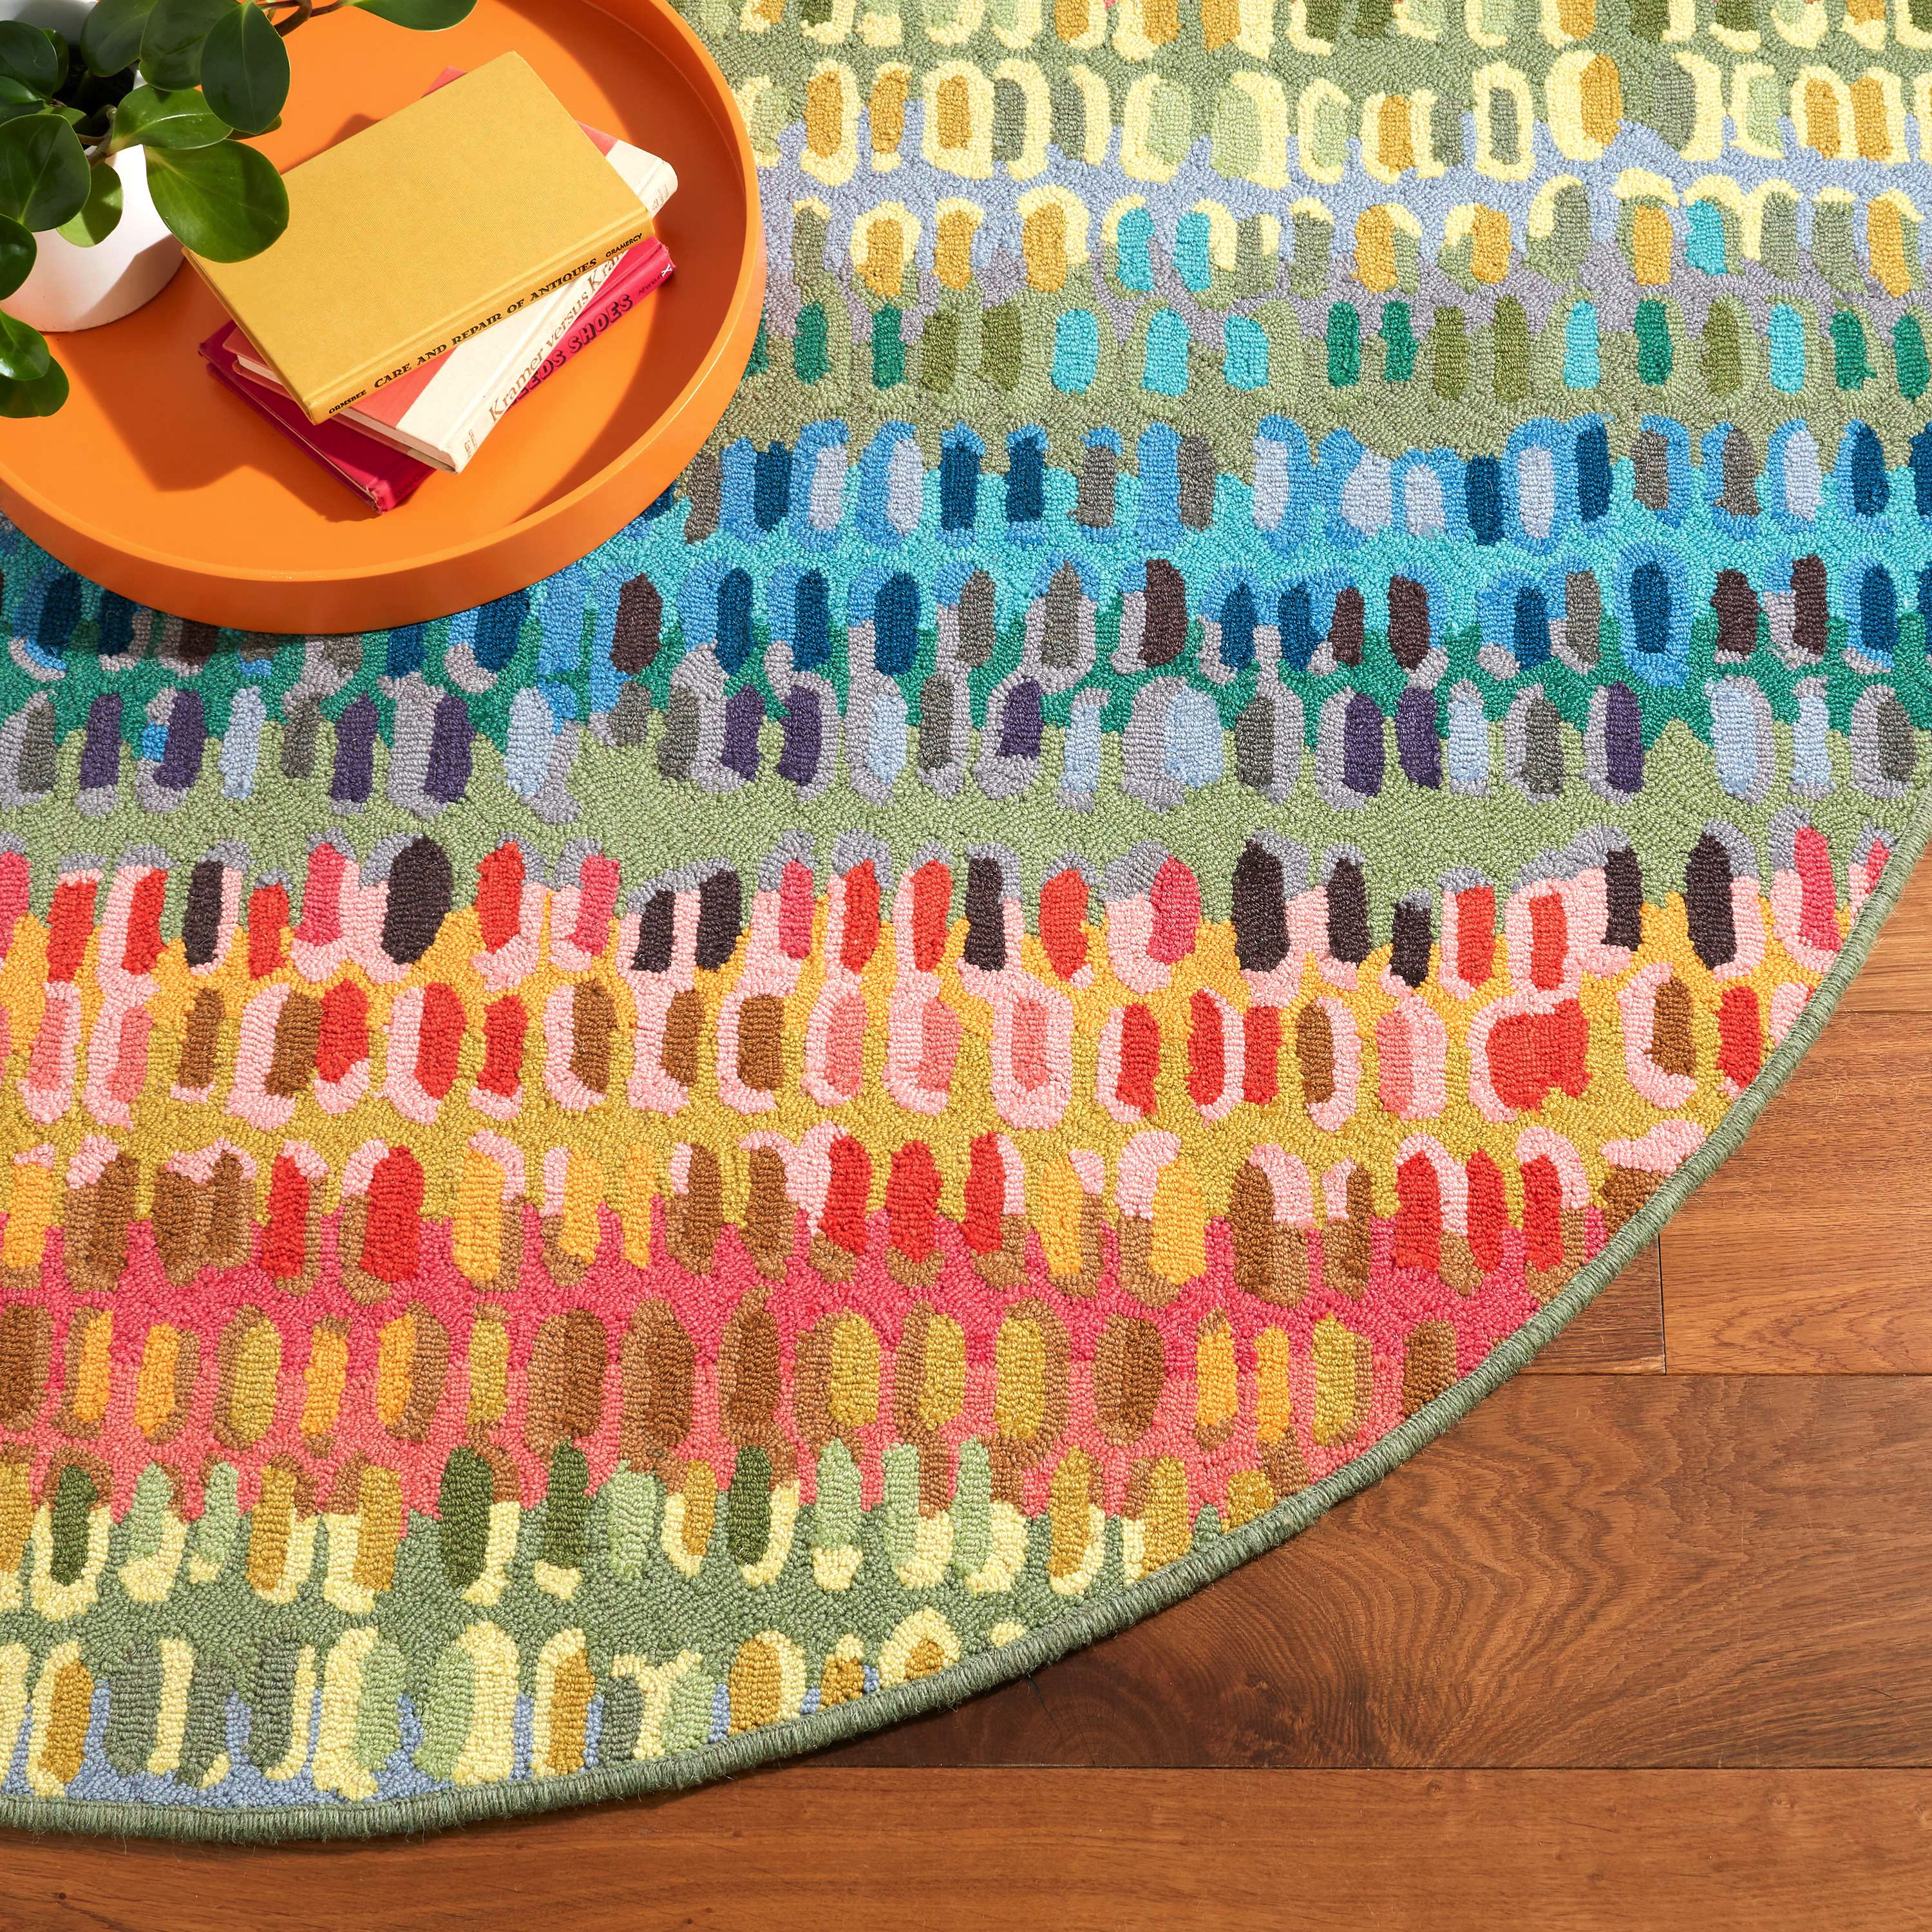 https://www.finelinens.com/media/catalog/product/2/7/270143___Paint_Chip_Micro_Hooked_Wool_Rug_2_1.jpg